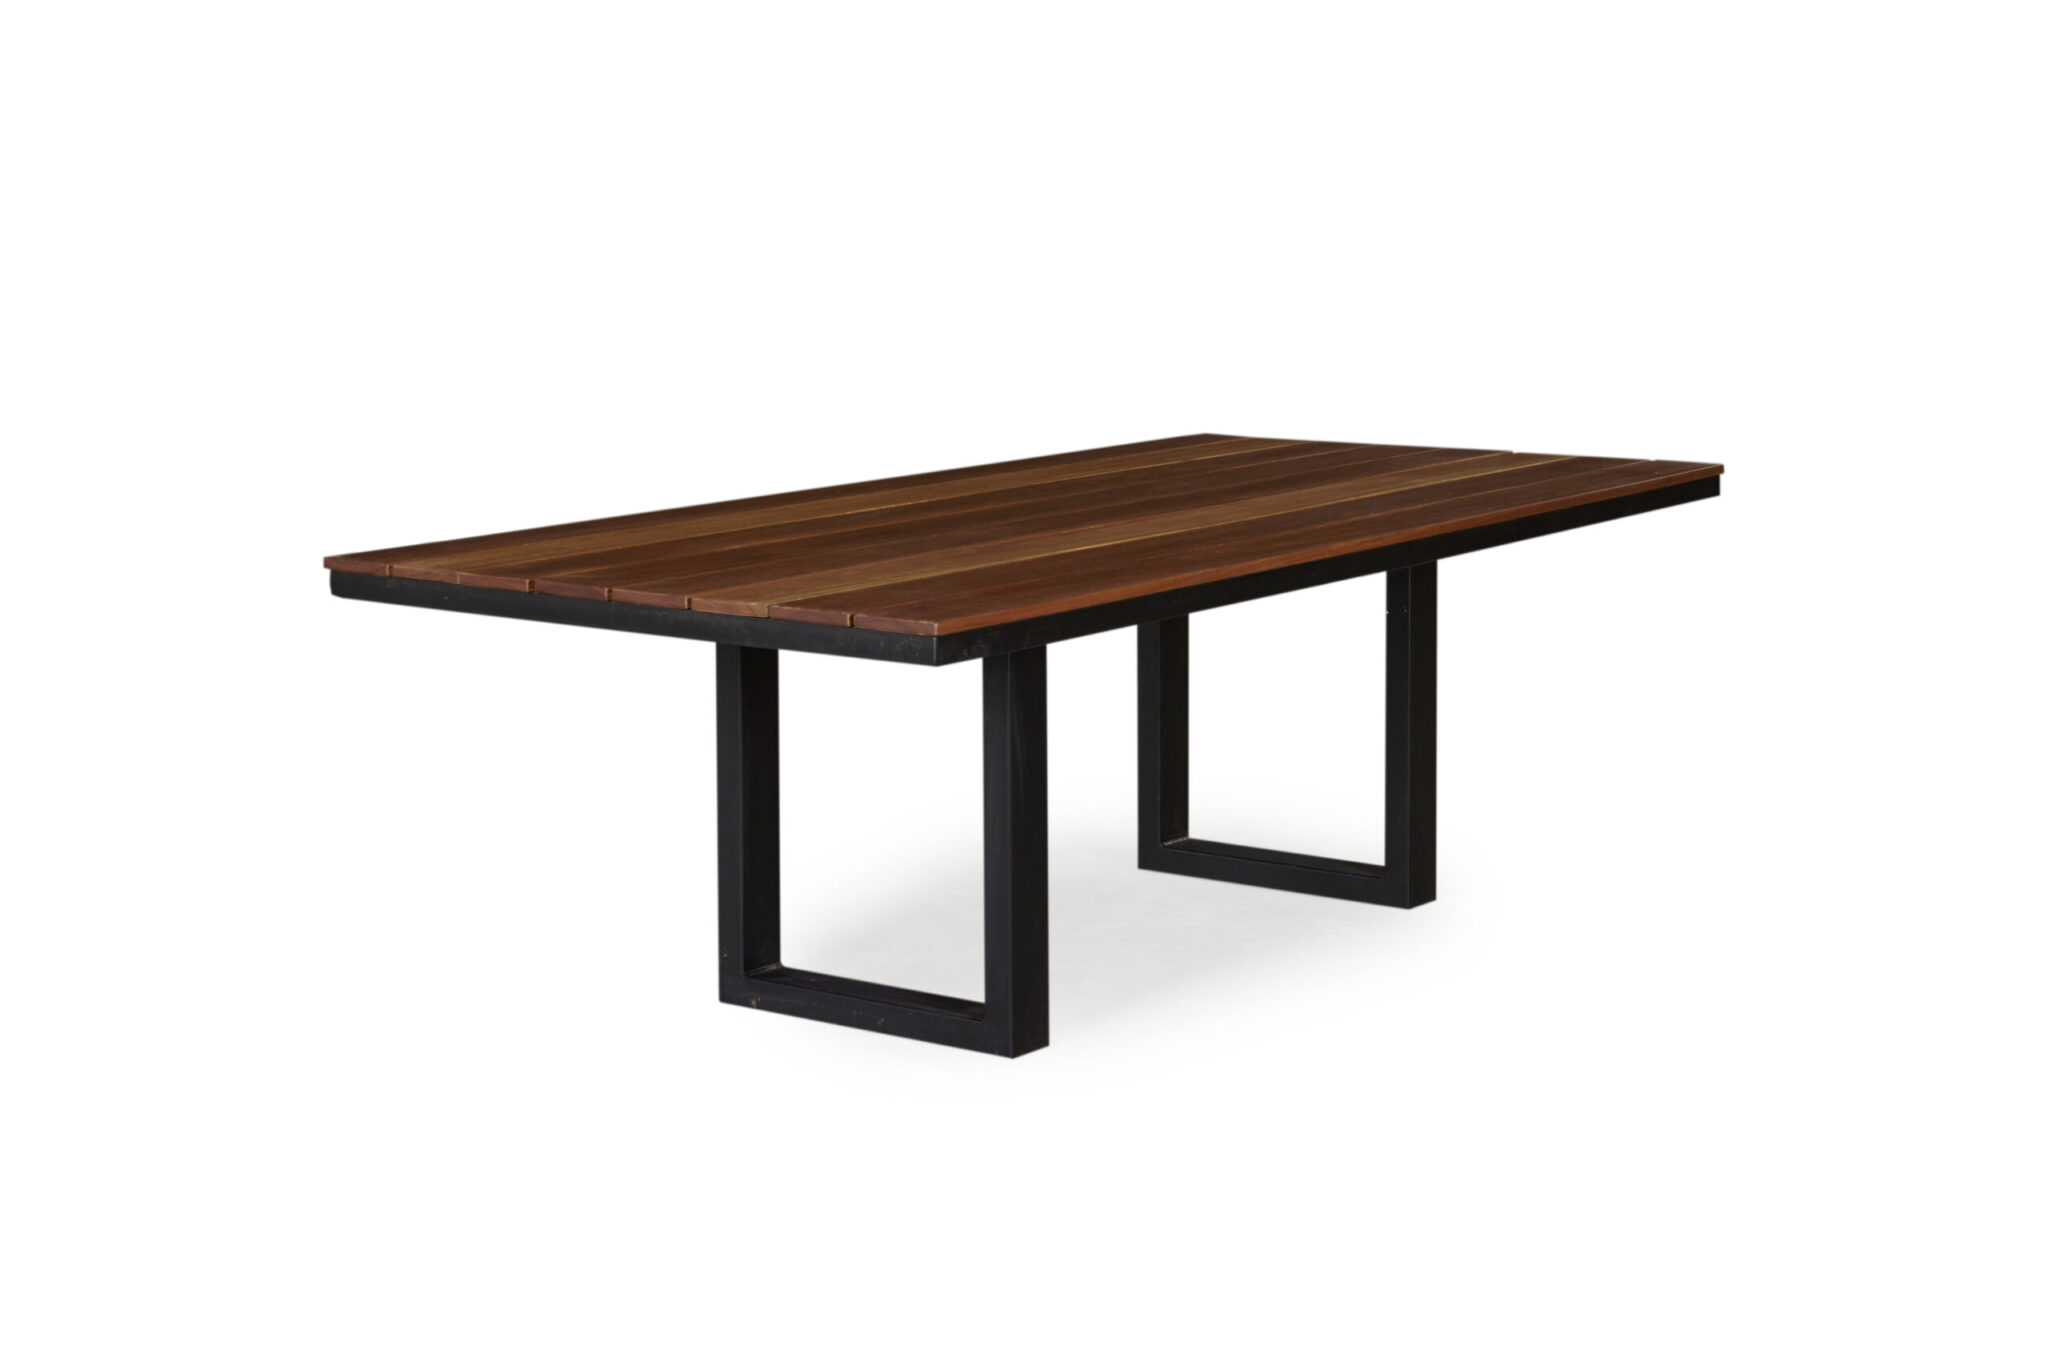 Ascot Outdoor Table crafted from American Oak timber dimensions L 2700mm x W 1100mm x H 750mm custom stain in Brazil available with U or Klein Steel base This alt text provides a succinct description of the image and its key details